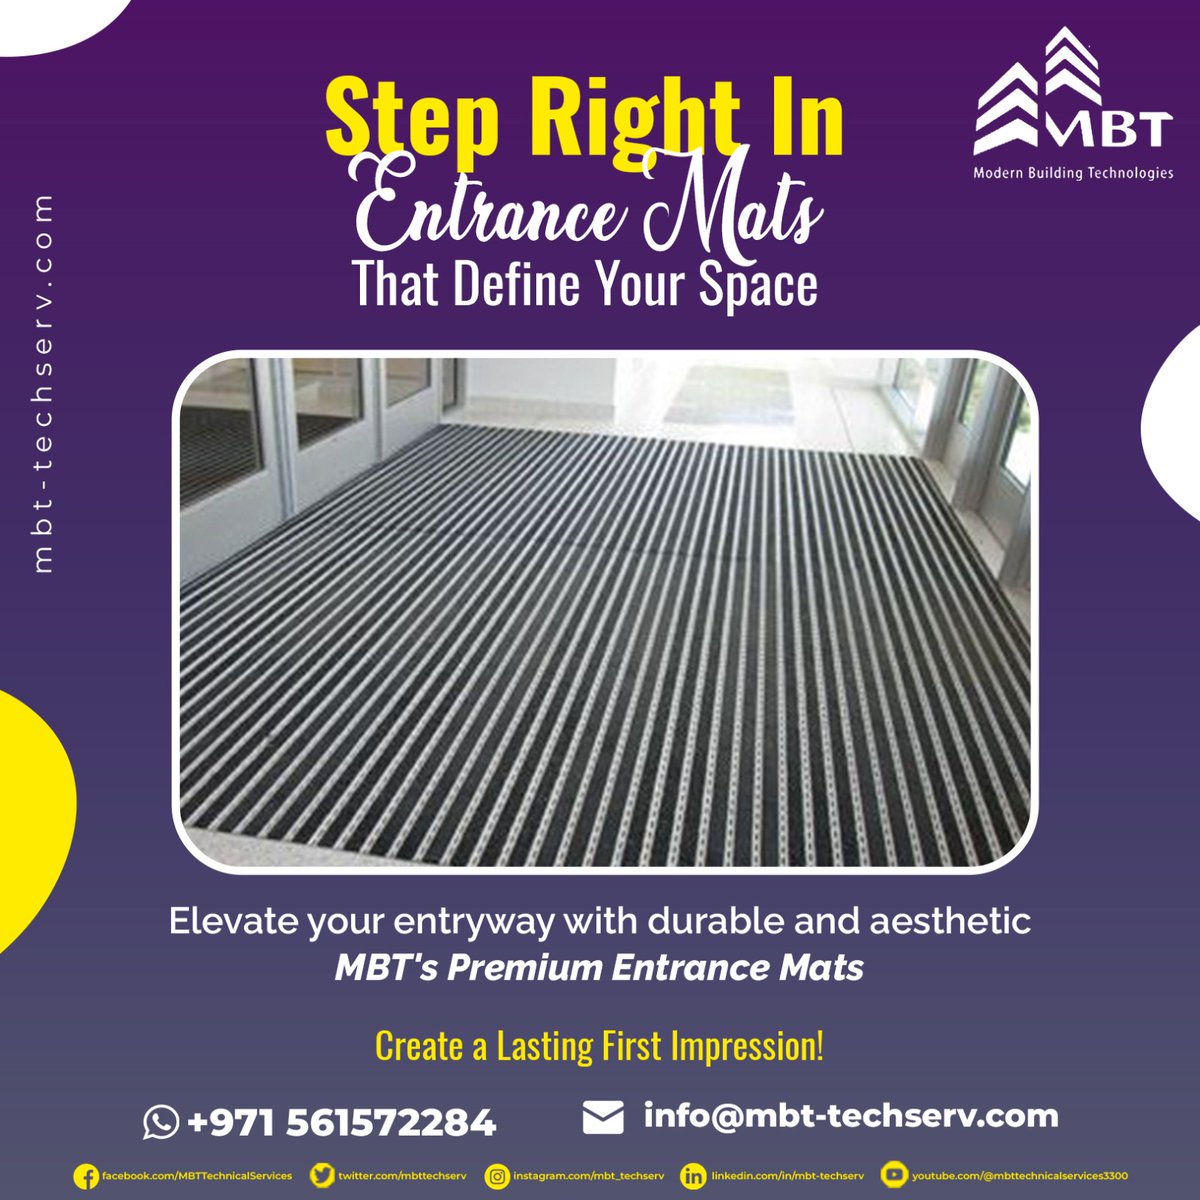 🏢 Impress Visitors and Enhance Your Business Entryway! 🌆

MBT's Entrance Mats are the key to a professional and clean entryway!

🔍 Find out more here: mbt-techserv.com/en/products-se…
📱 WhatsApp: +971502323001
📞 Call: +971561572284
📧 Email: info@mbt-techserv.com

#mbt #entrancemats